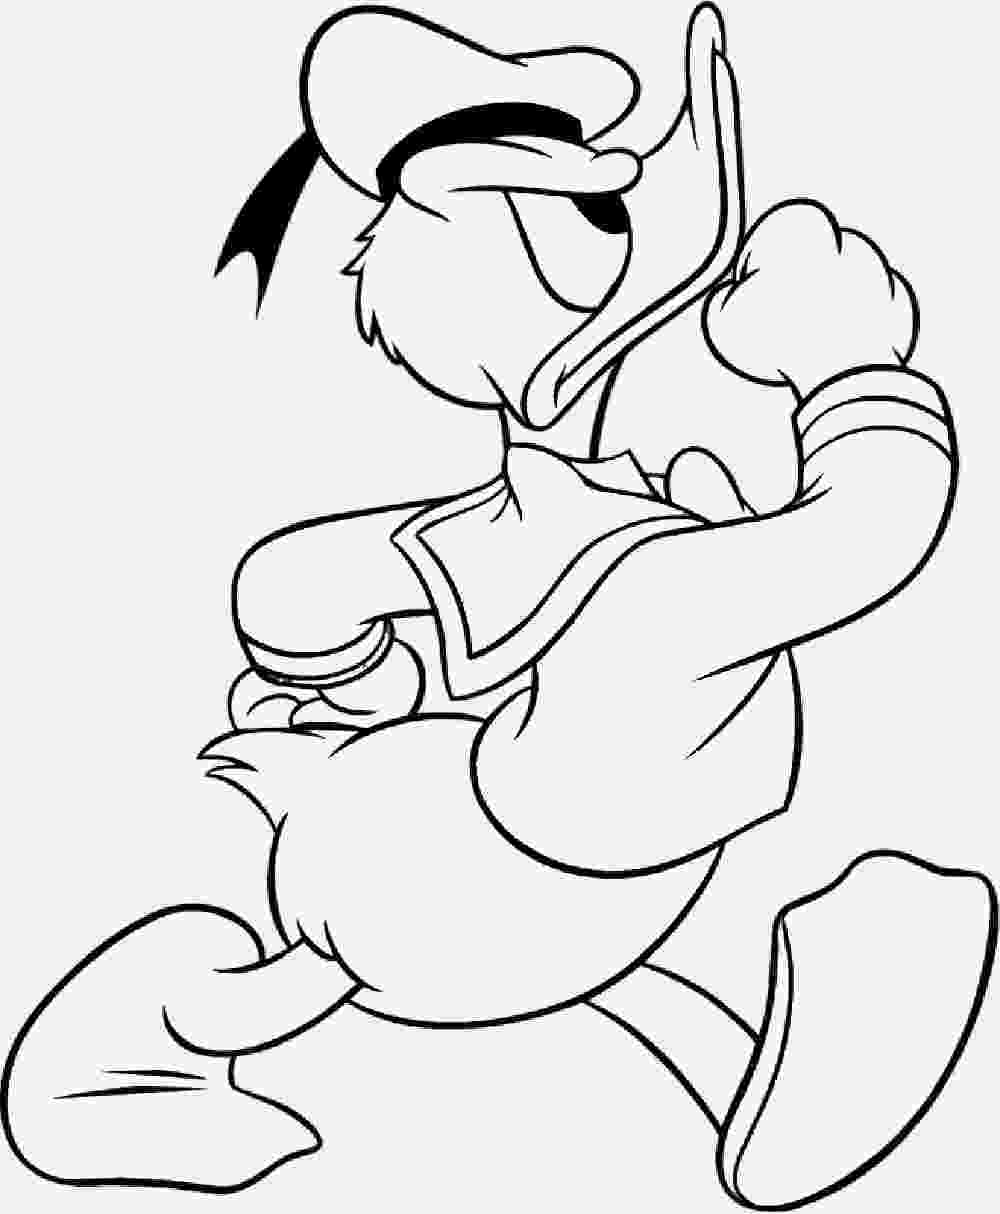 duck coloring sheet coloring blog for kids donald duck coloring pages duck sheet coloring 